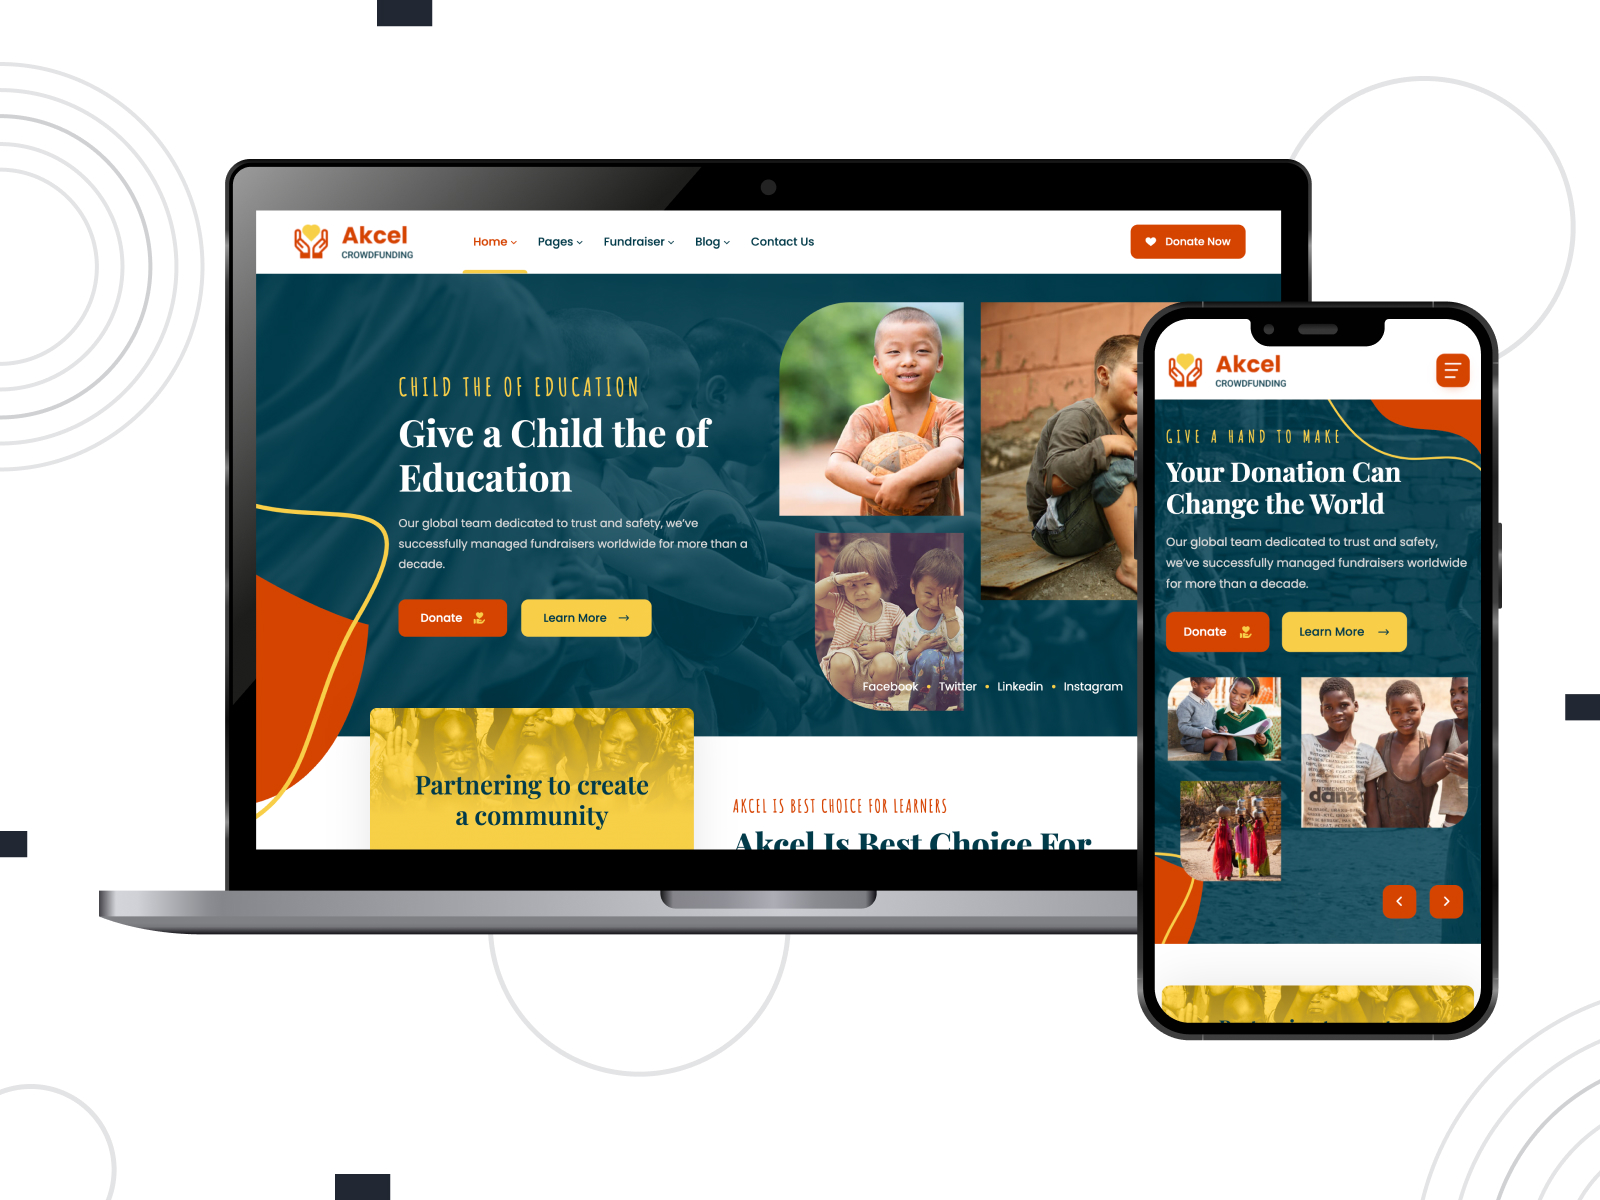 Picture of Akcel - responsive and fully-fledged theme for fundraisers with pre-built categories in orangered, darkslategray, gold, and white pigment arrangement.